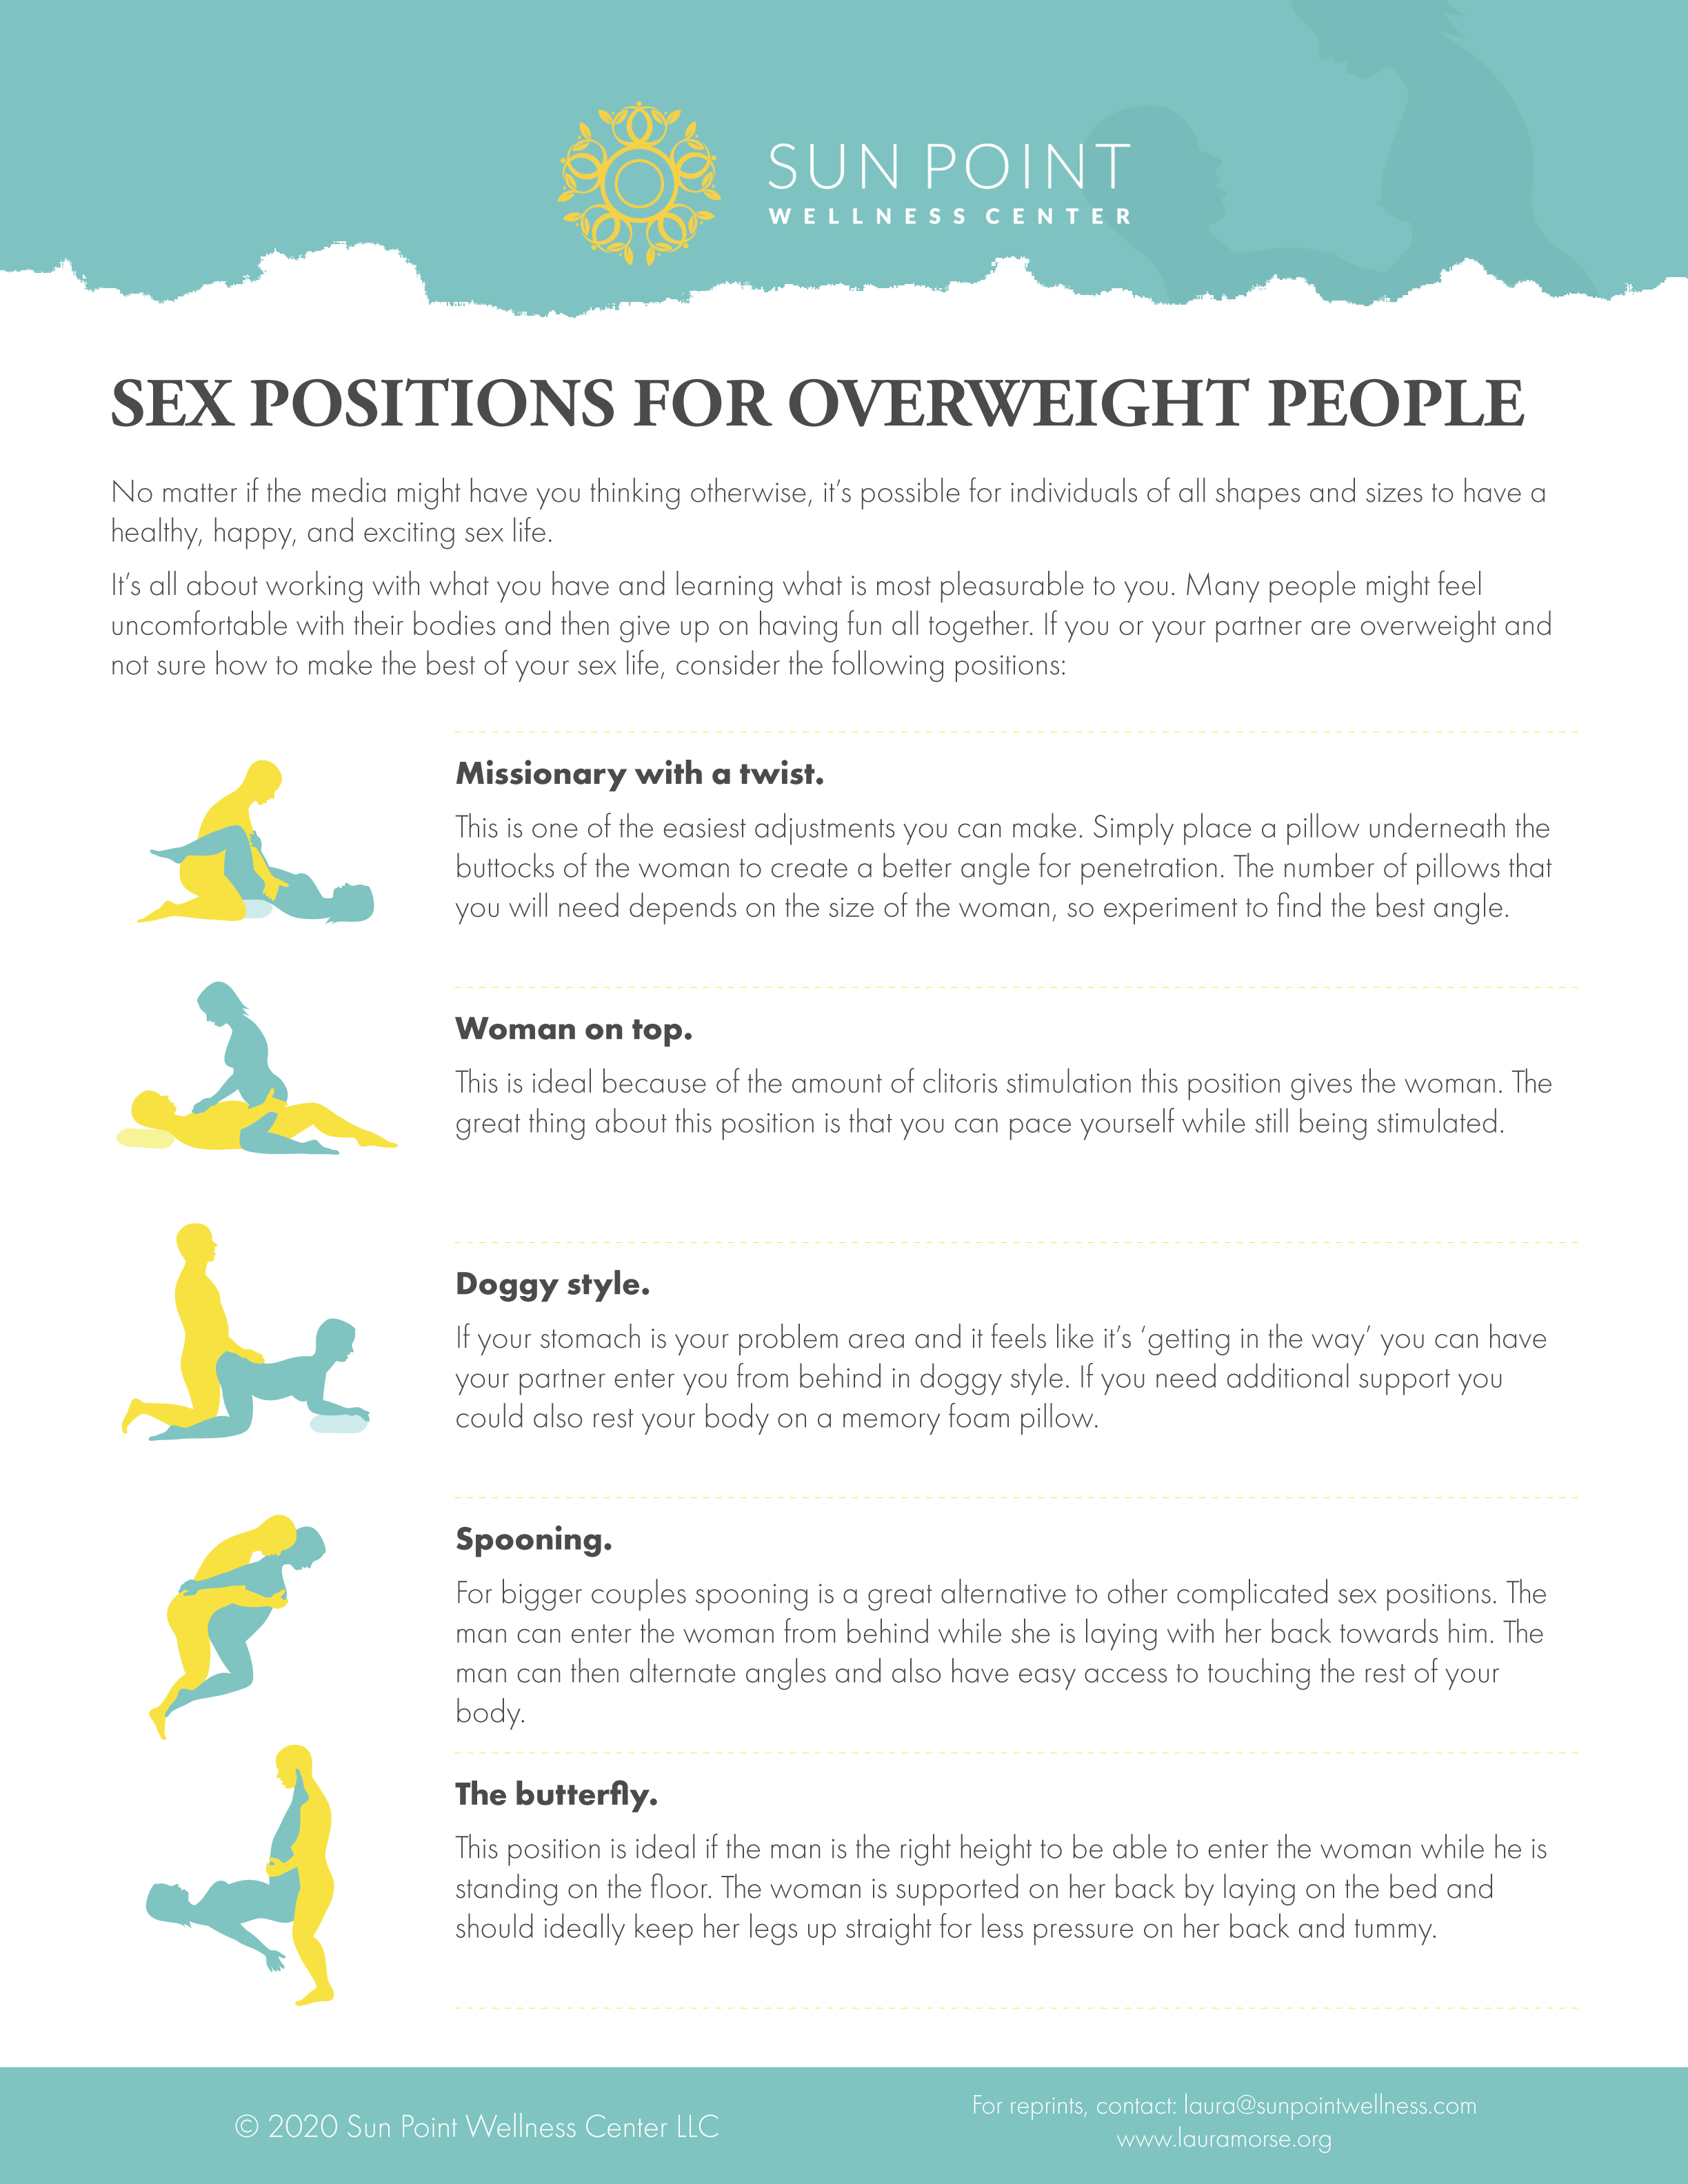 amgd ali recommends Sexual Positions For Overweight